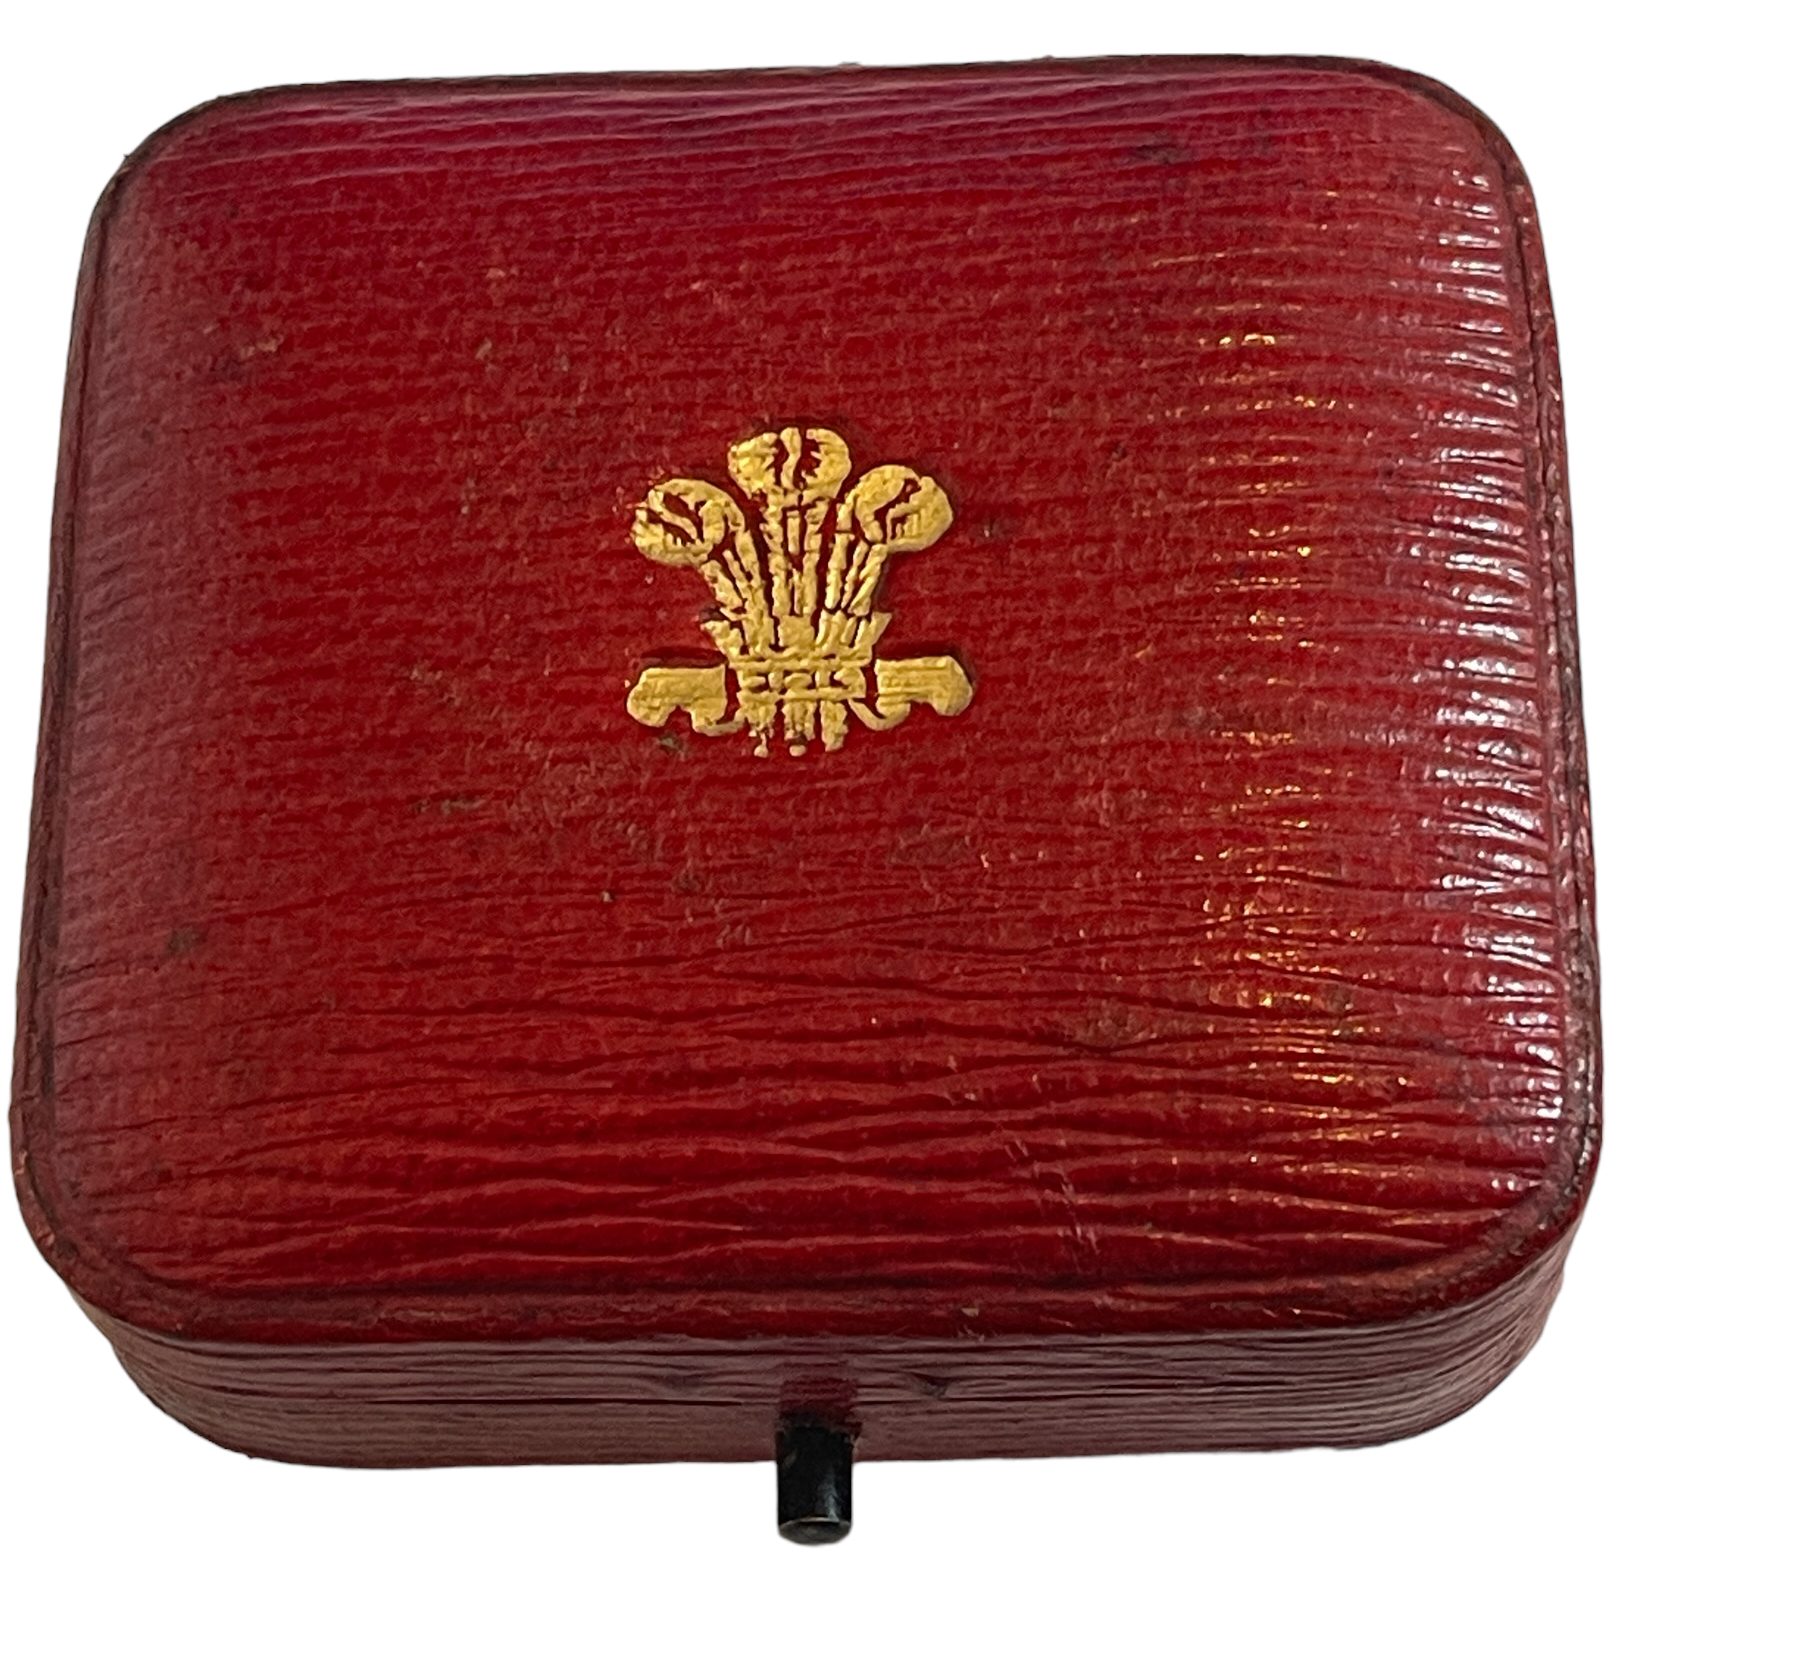 Alfred Clark New Bond St London Prince of Wales Feathers Cypher Boxed Vesta Case. - Image 9 of 13